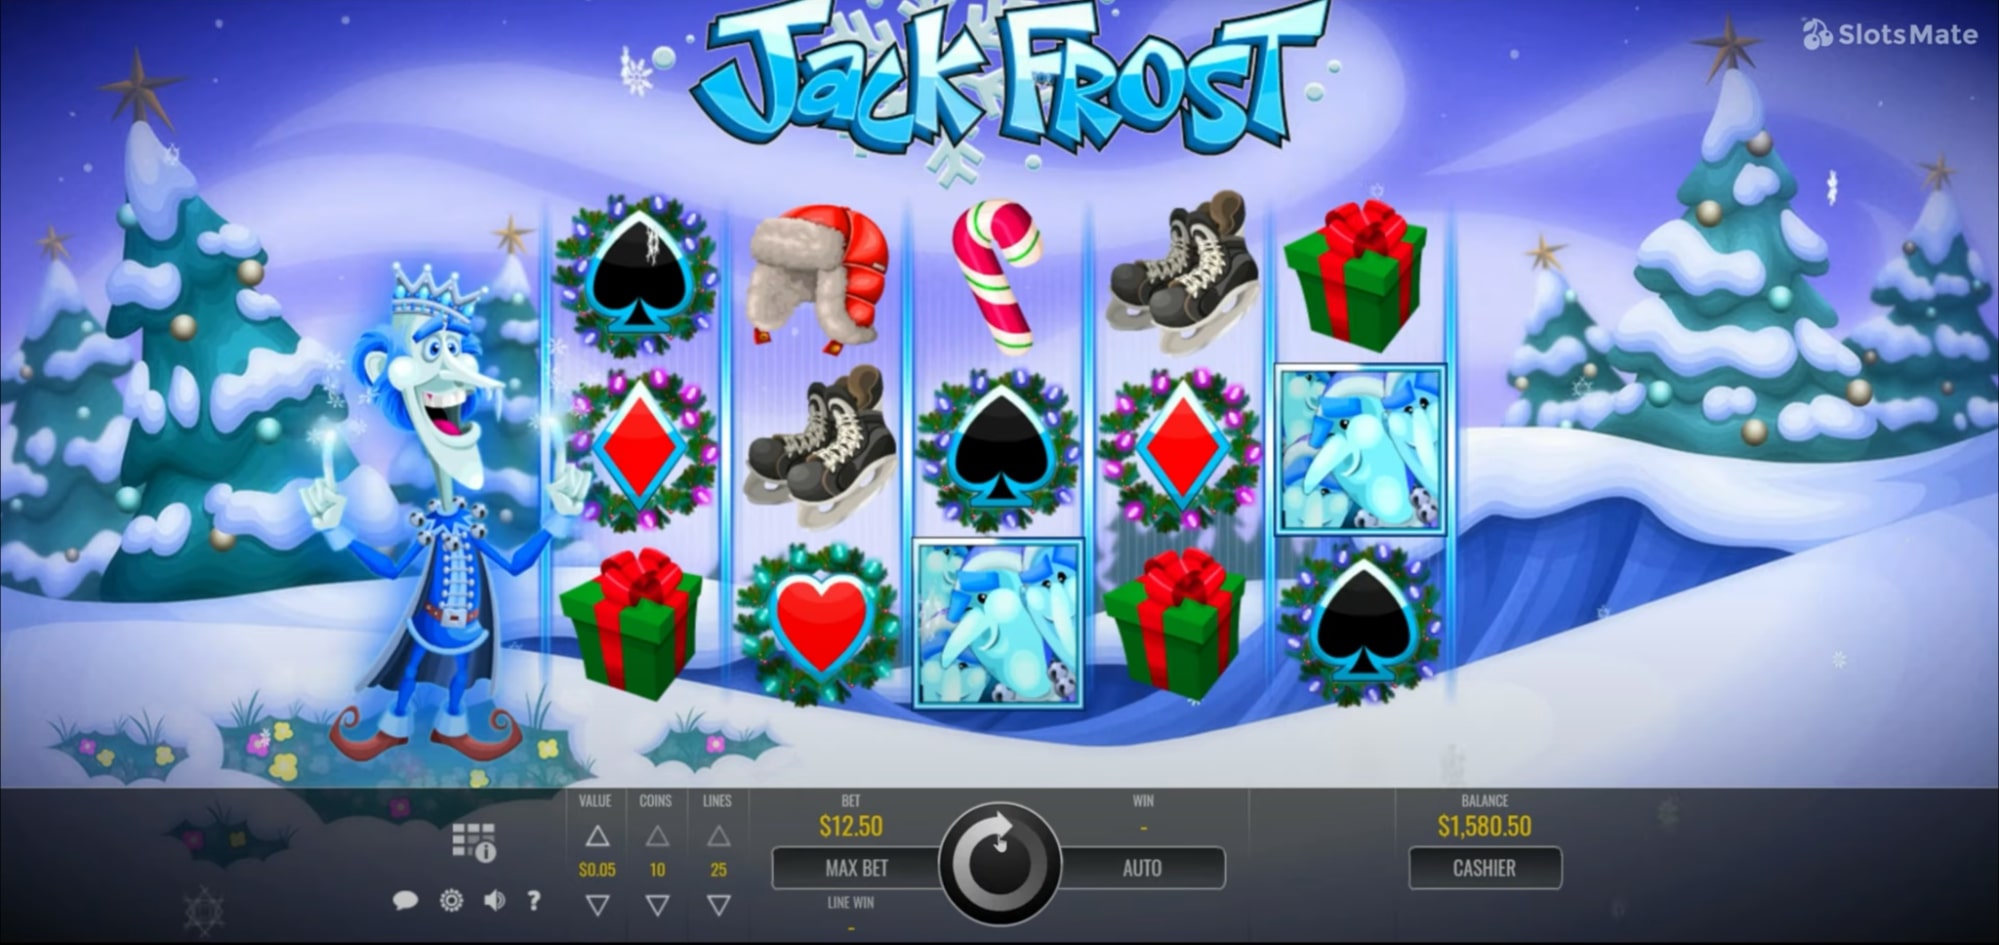 JACK FROST BY RIVAL